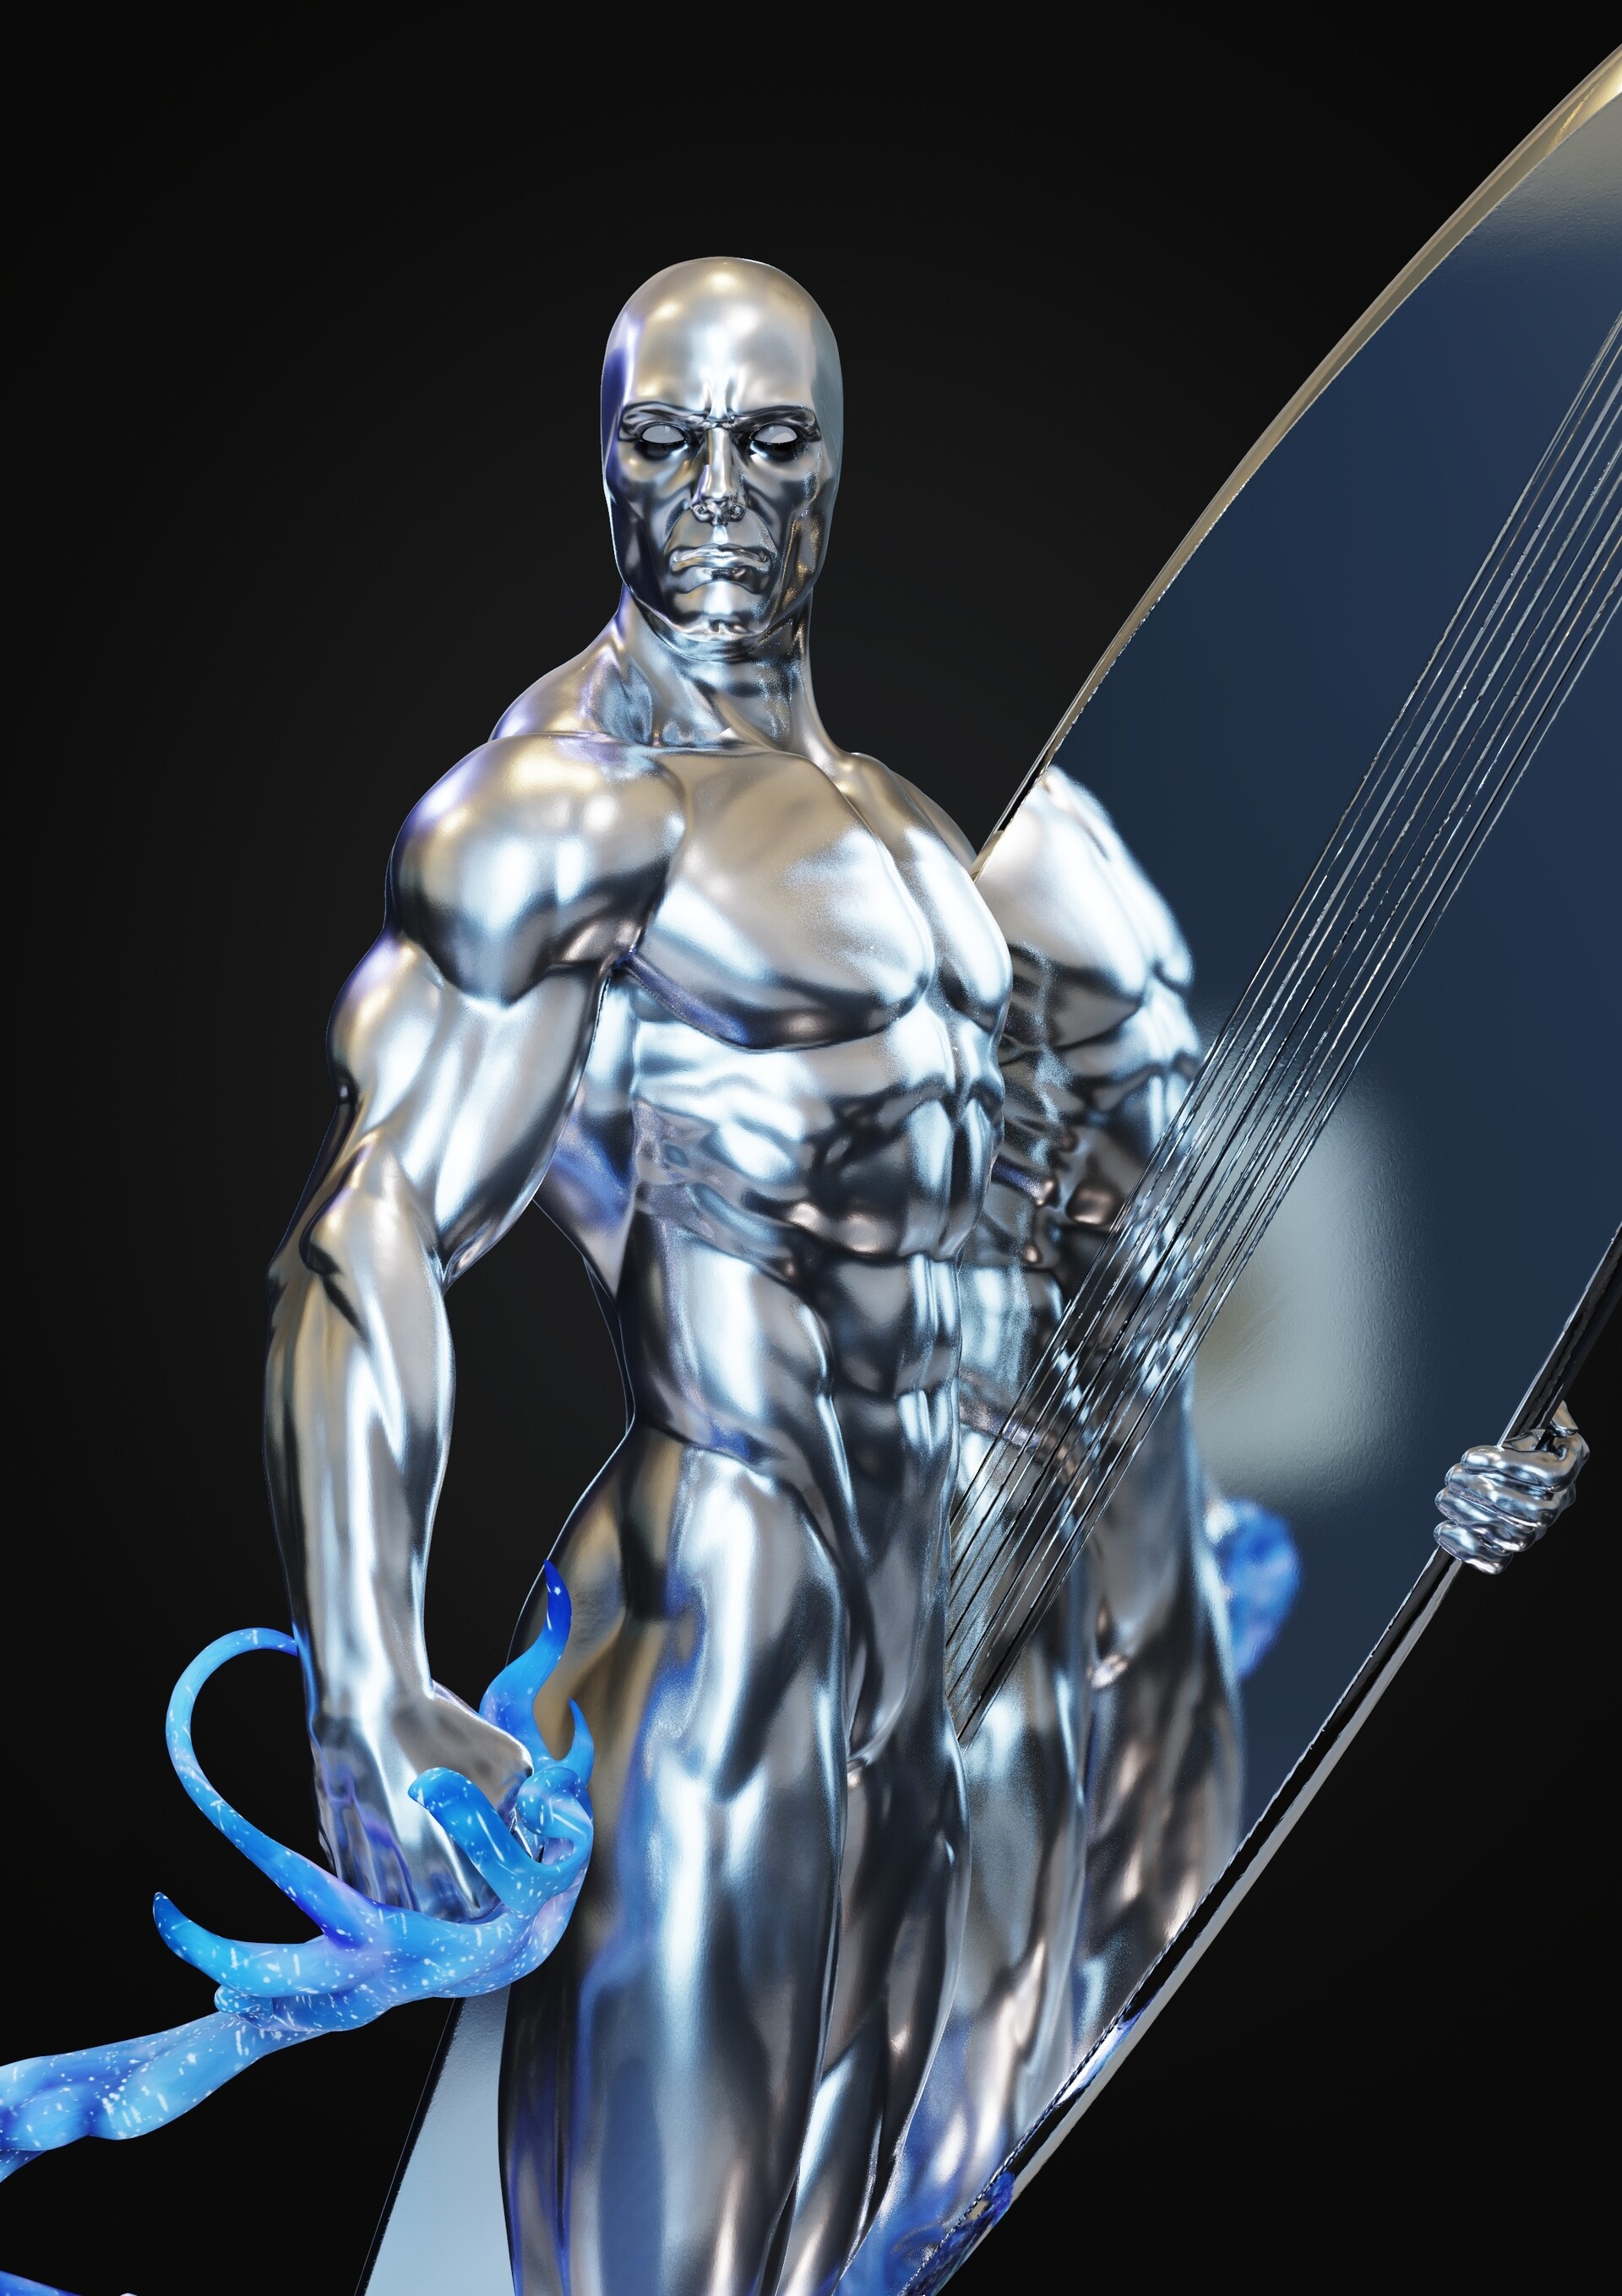 Silver Surfer artwork, Cosmic observer, Fantastic Four ally, Surfing the stars, 1920x2720 HD Handy